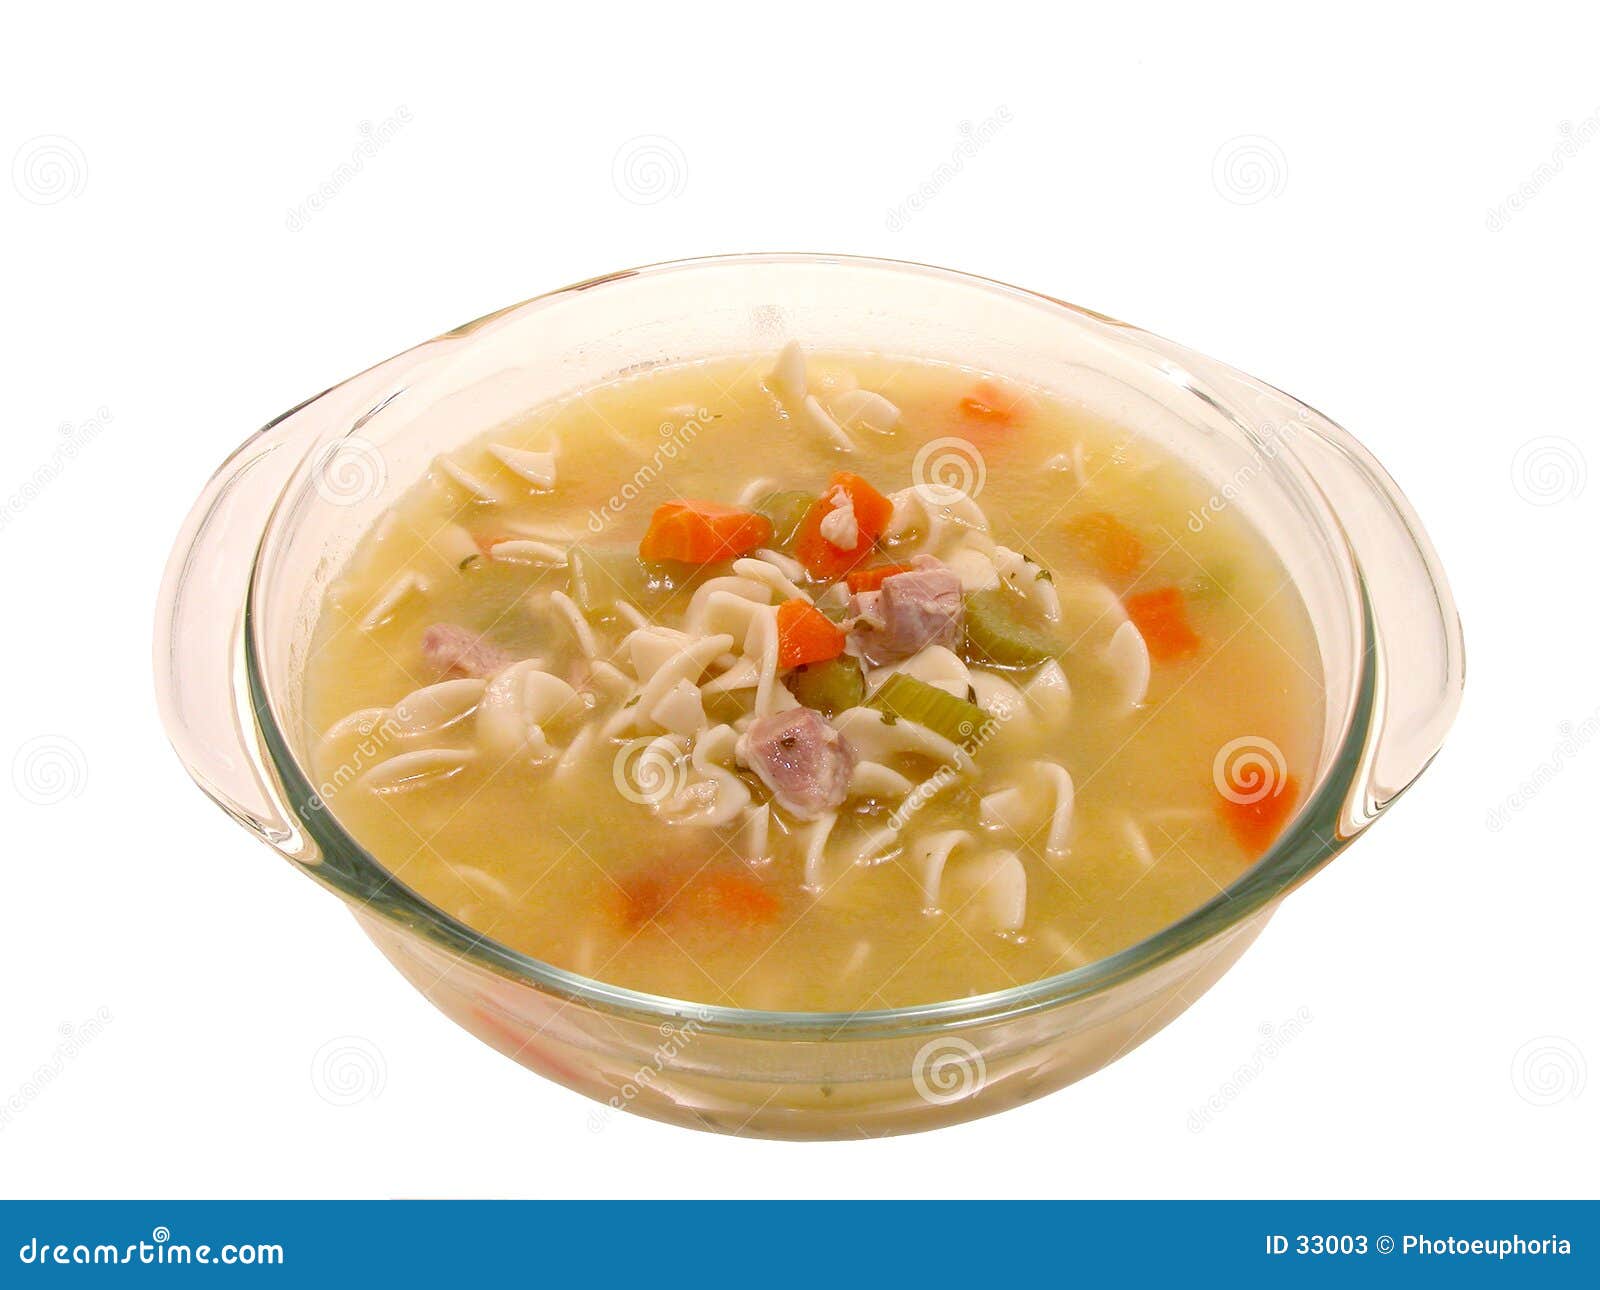 clipart chicken soup - photo #28